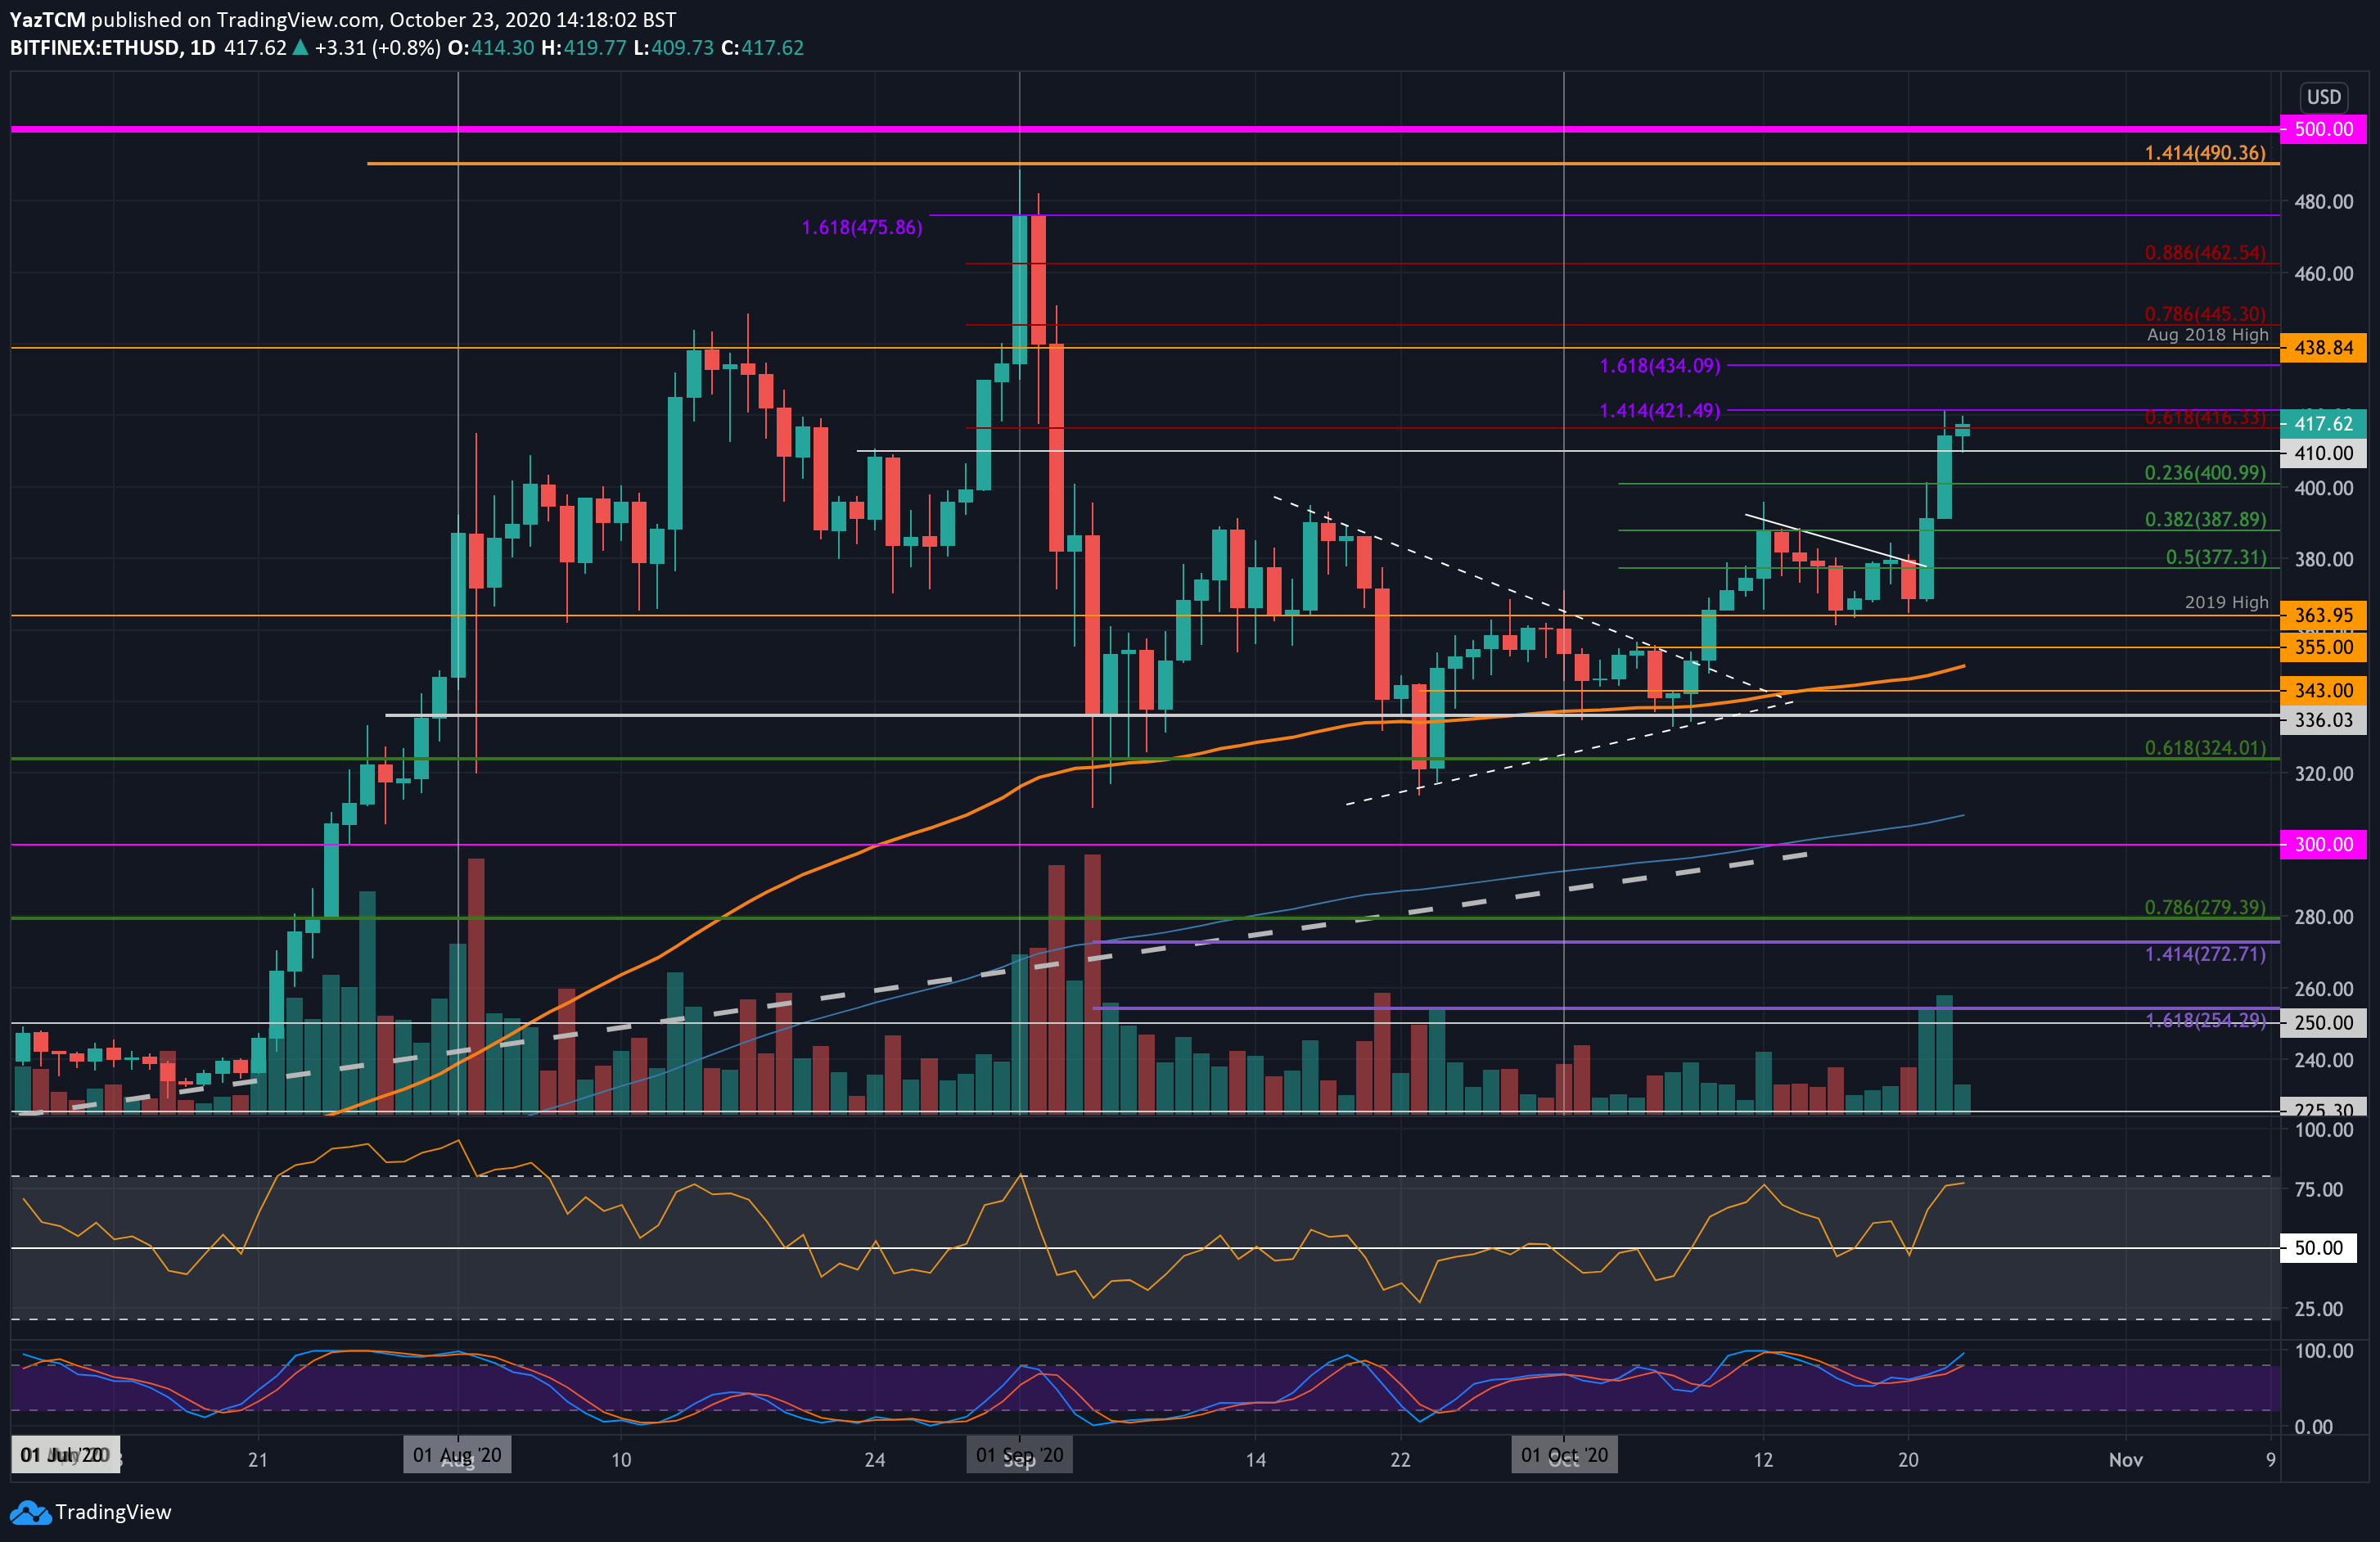 Crypto Price Analysis & Overview October 23rd: Bitcoin, Ethereum, Ripple, Litecoin, and Bitcoin Cash